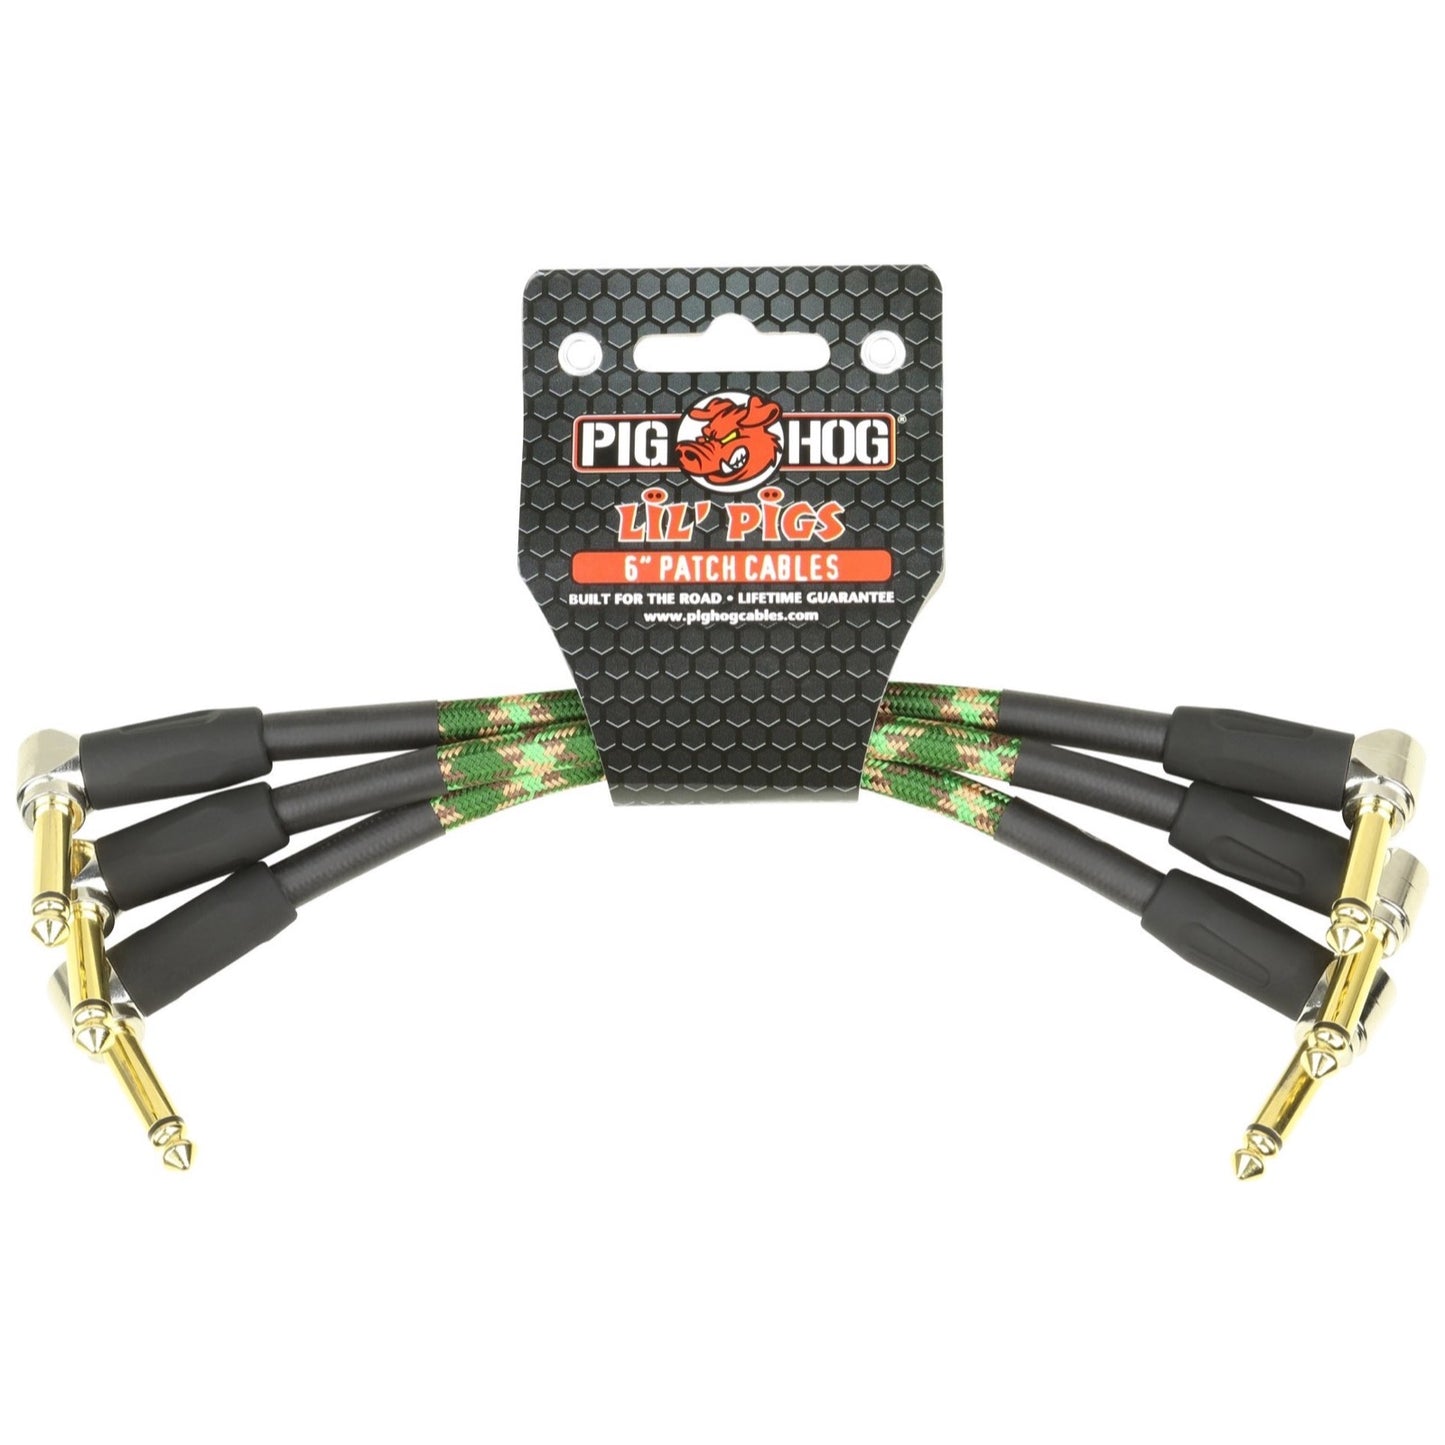 Pig Hog Lil Pigs Pedal Patch Cables, Vintage Camouflage, 3-Pack, 6 Inch